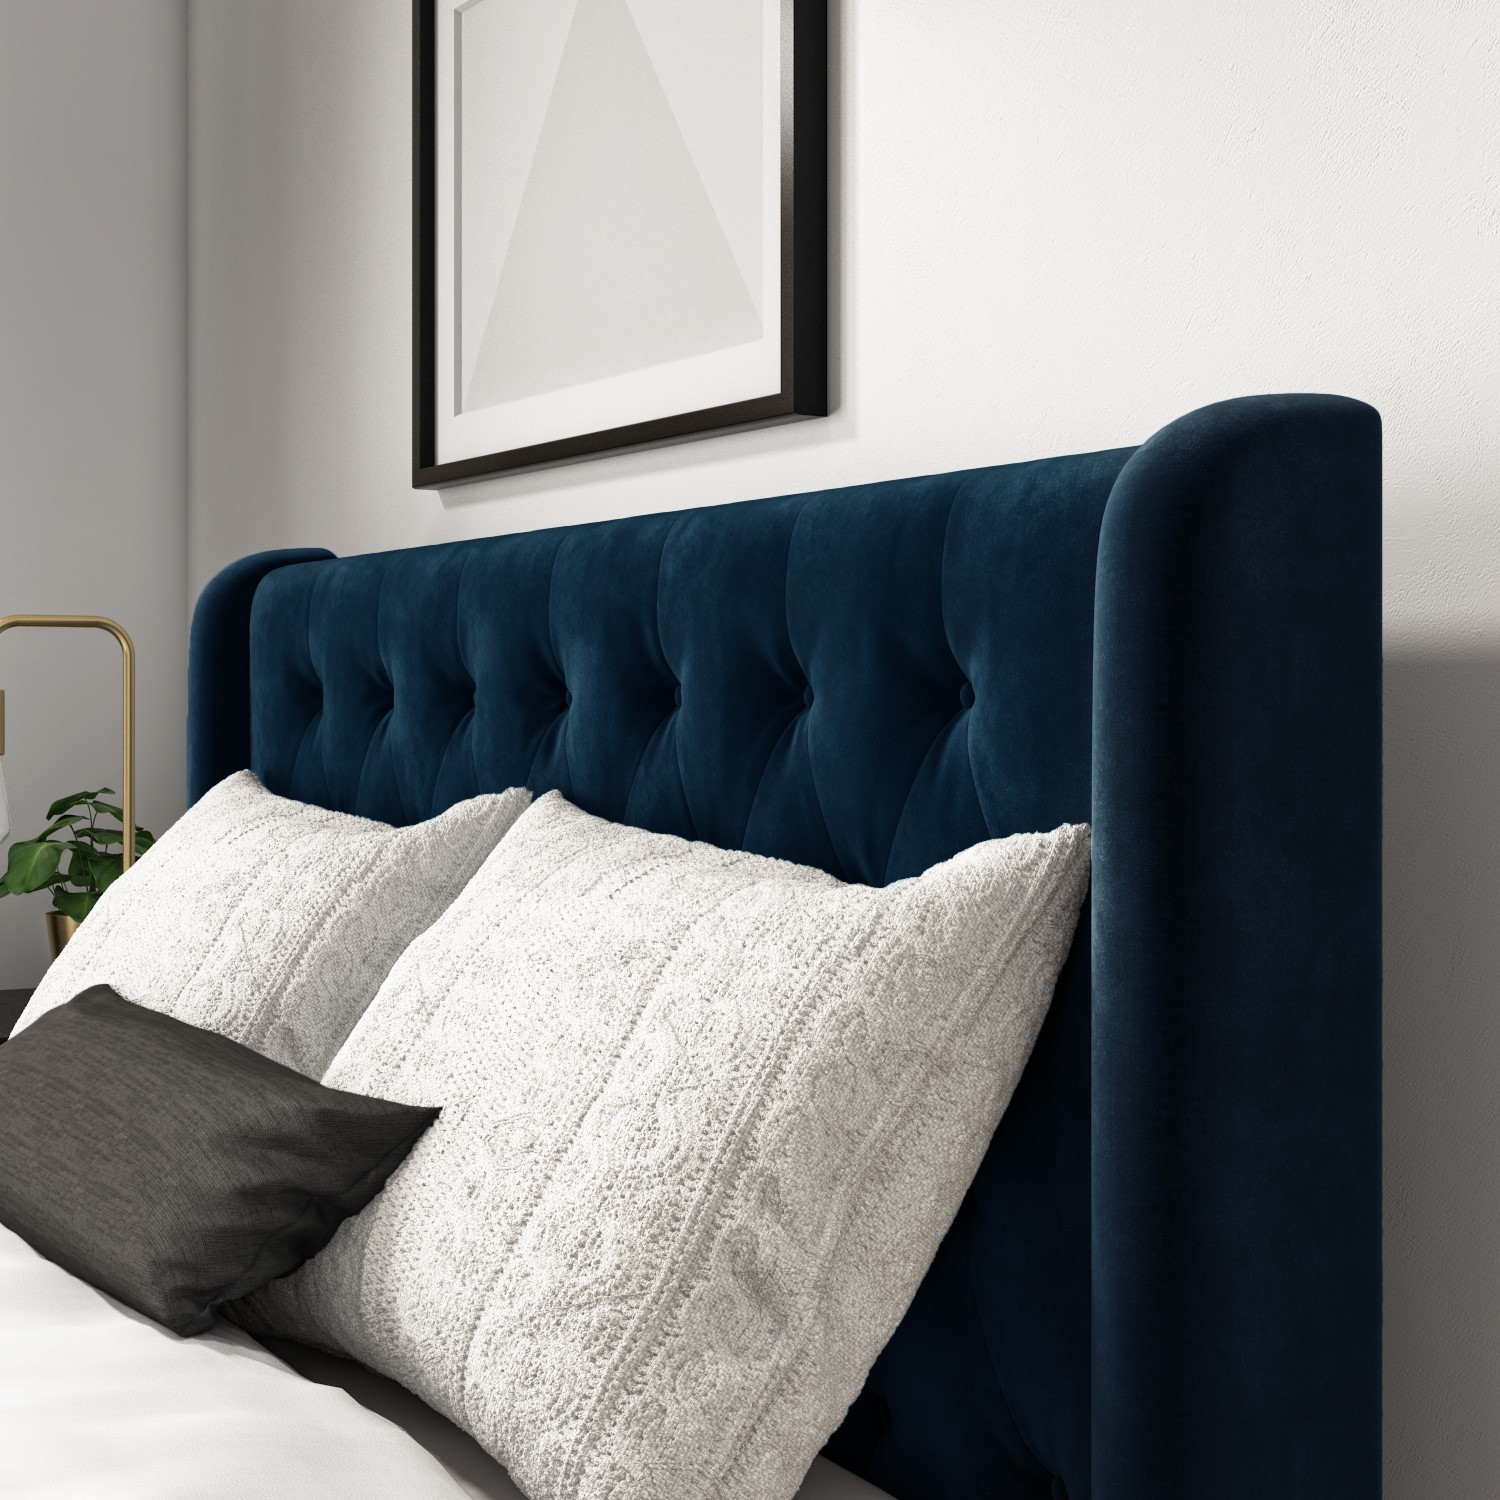 Amara Double Bed Frame In Navy Blue, Blue Headboard Bed